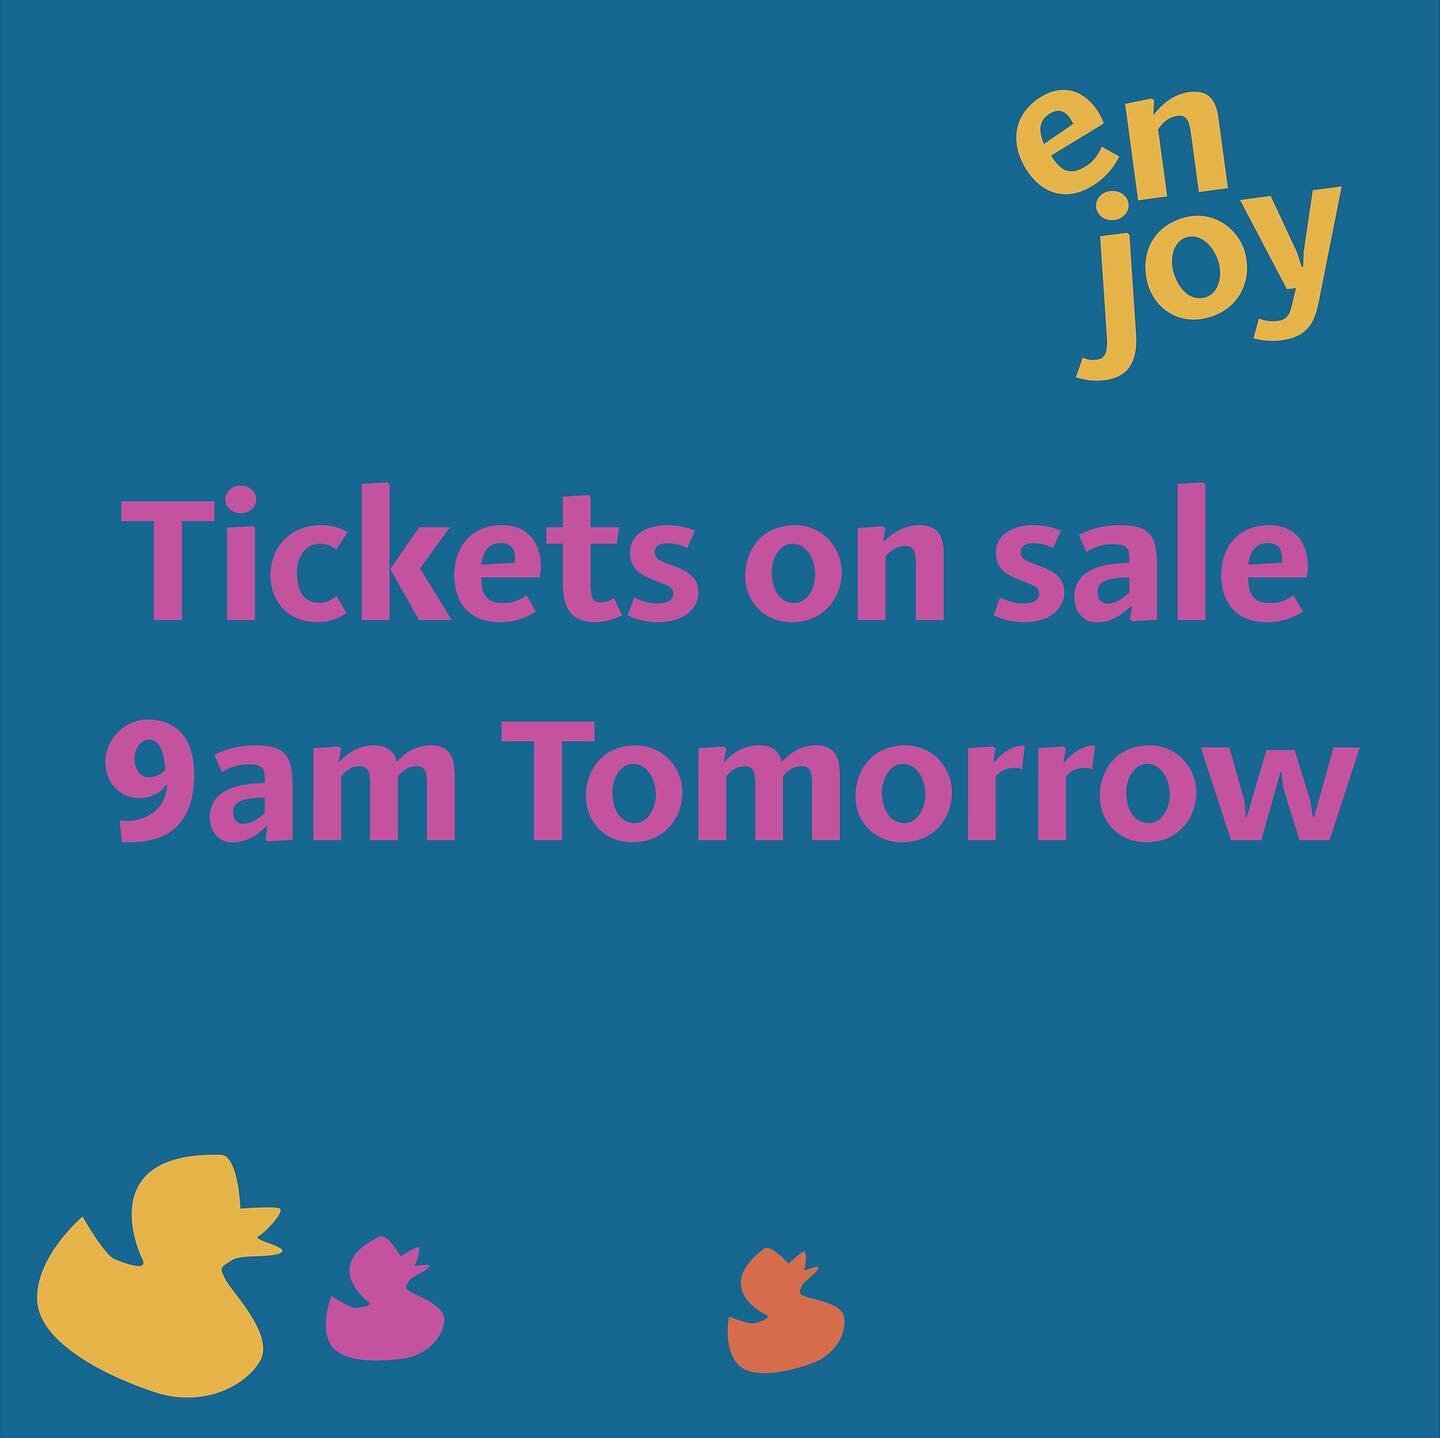 Set your alarm friends ⏰
Tickets go on sale tomorrow at 9am for the @bendigocb_tumbarumba Tumbafest 2021 via our brand new website - link in bio